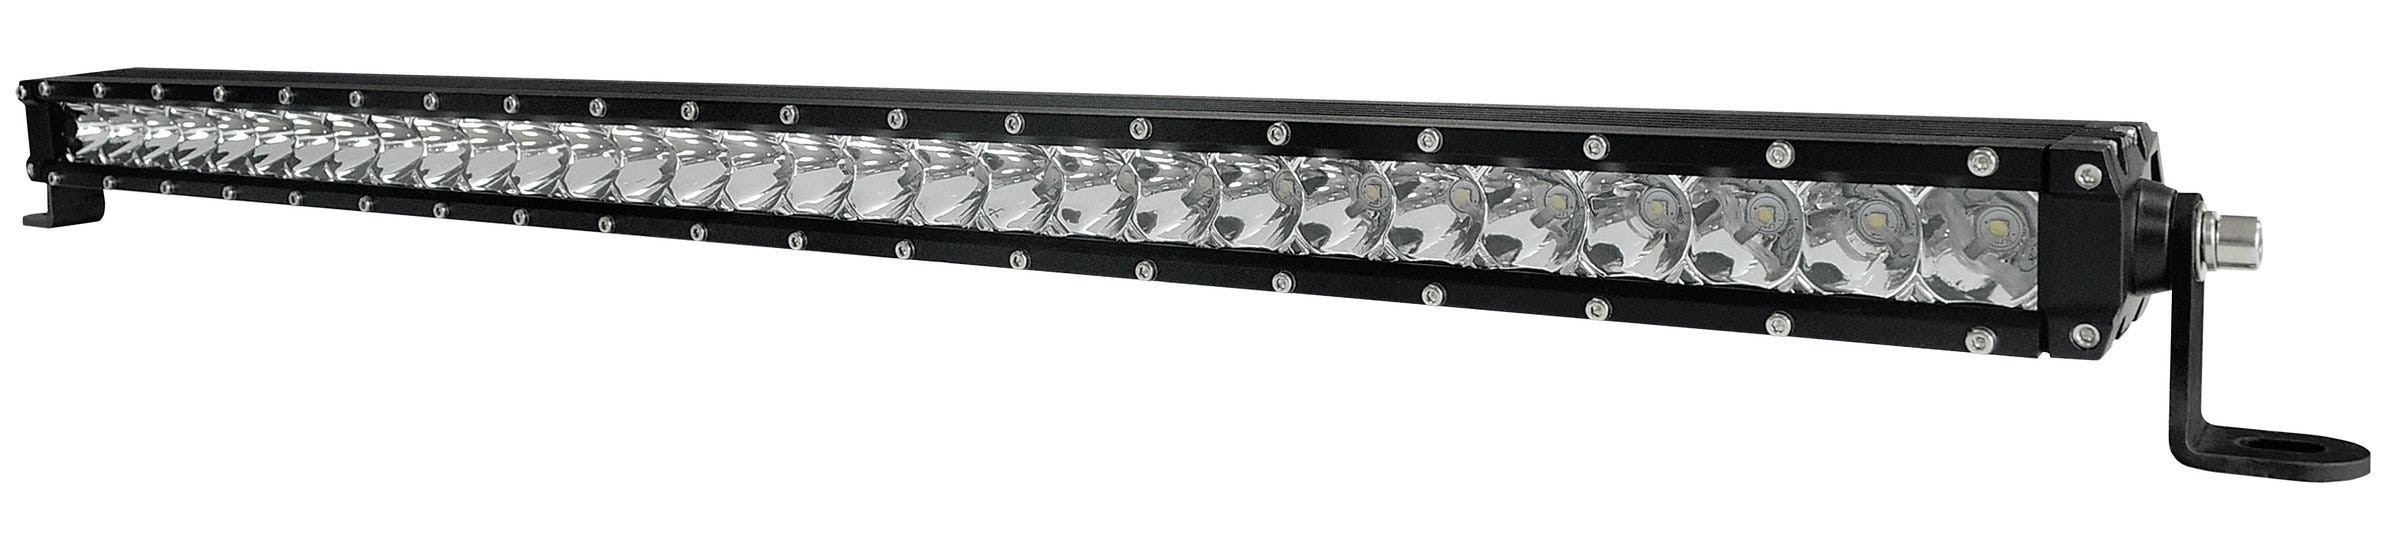 evergear-30-inch-150w-offroad-roof-led-single-row-light-bar-for-suv-atv-size-31-57-1